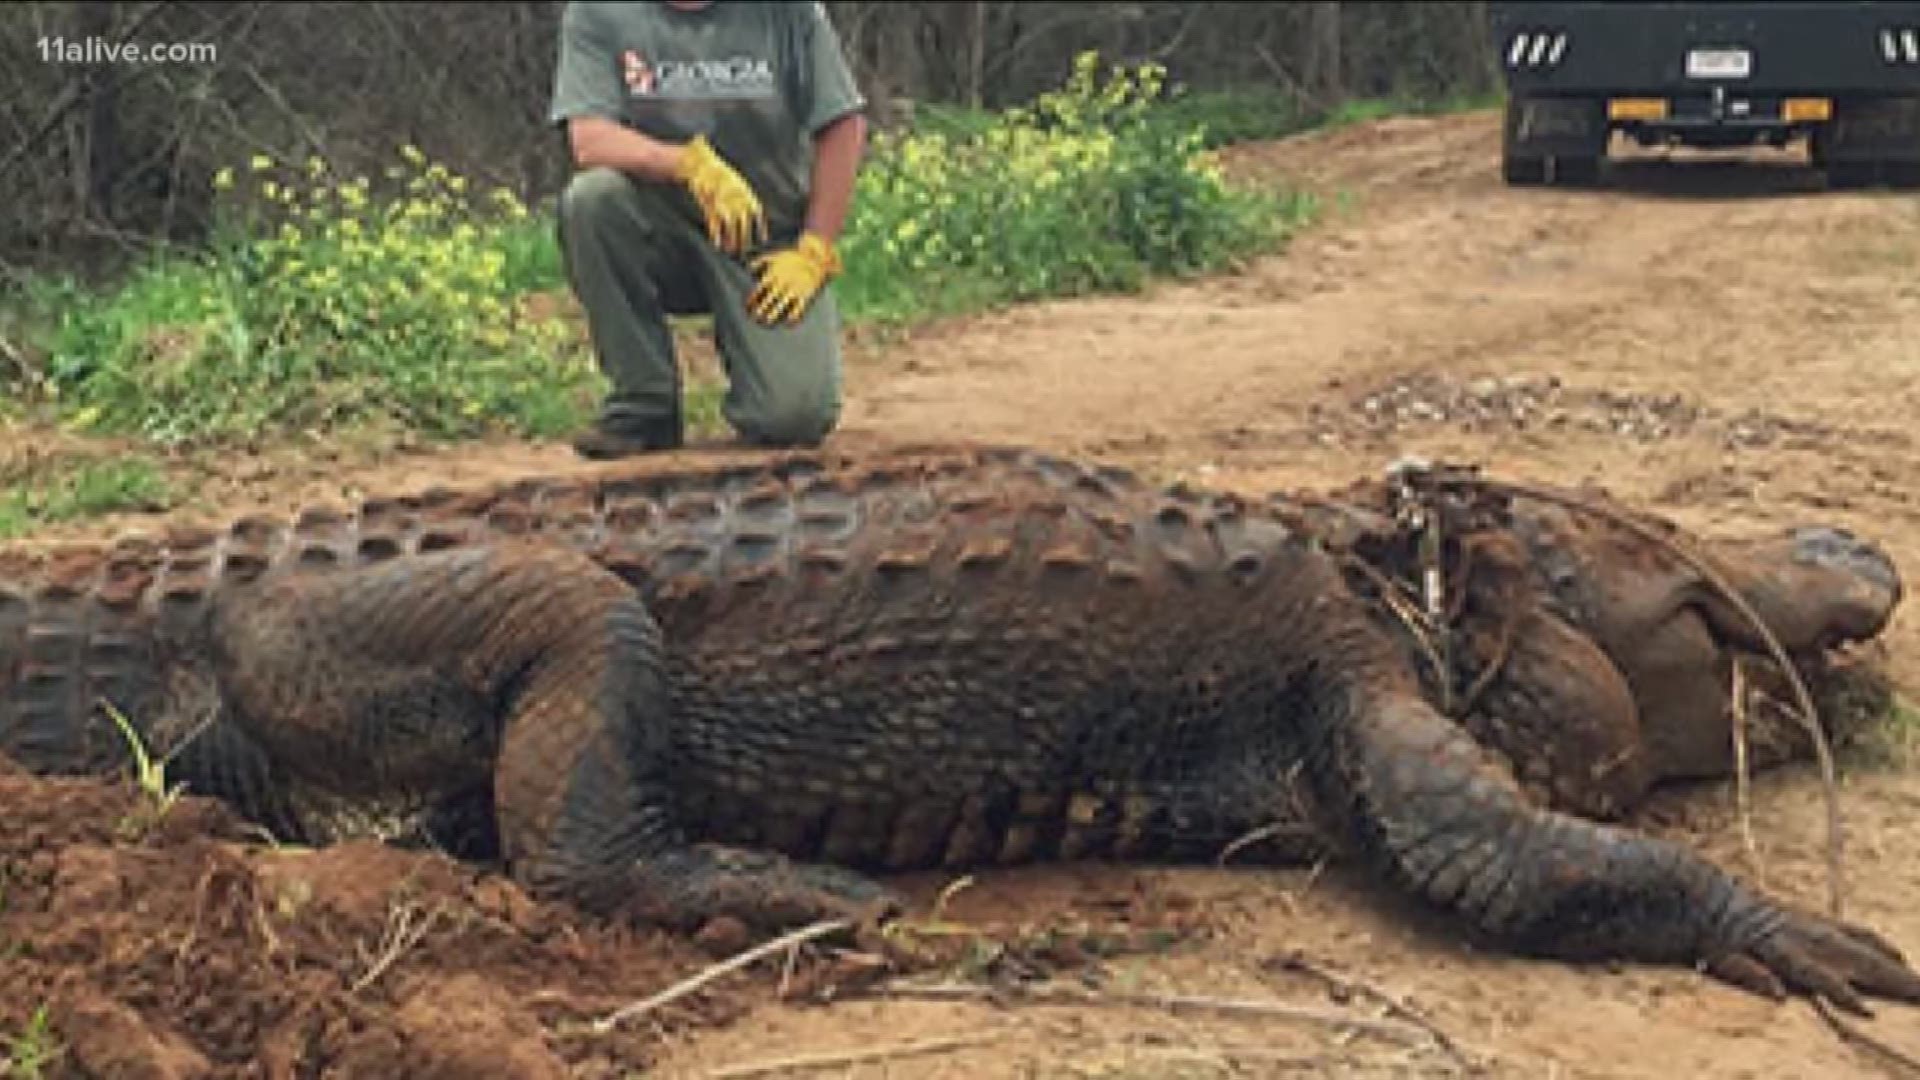 This 13 foot 4 inch alligator was found in an irrigation ditch off of Lake Blackshear in Sumter County, Georgia.